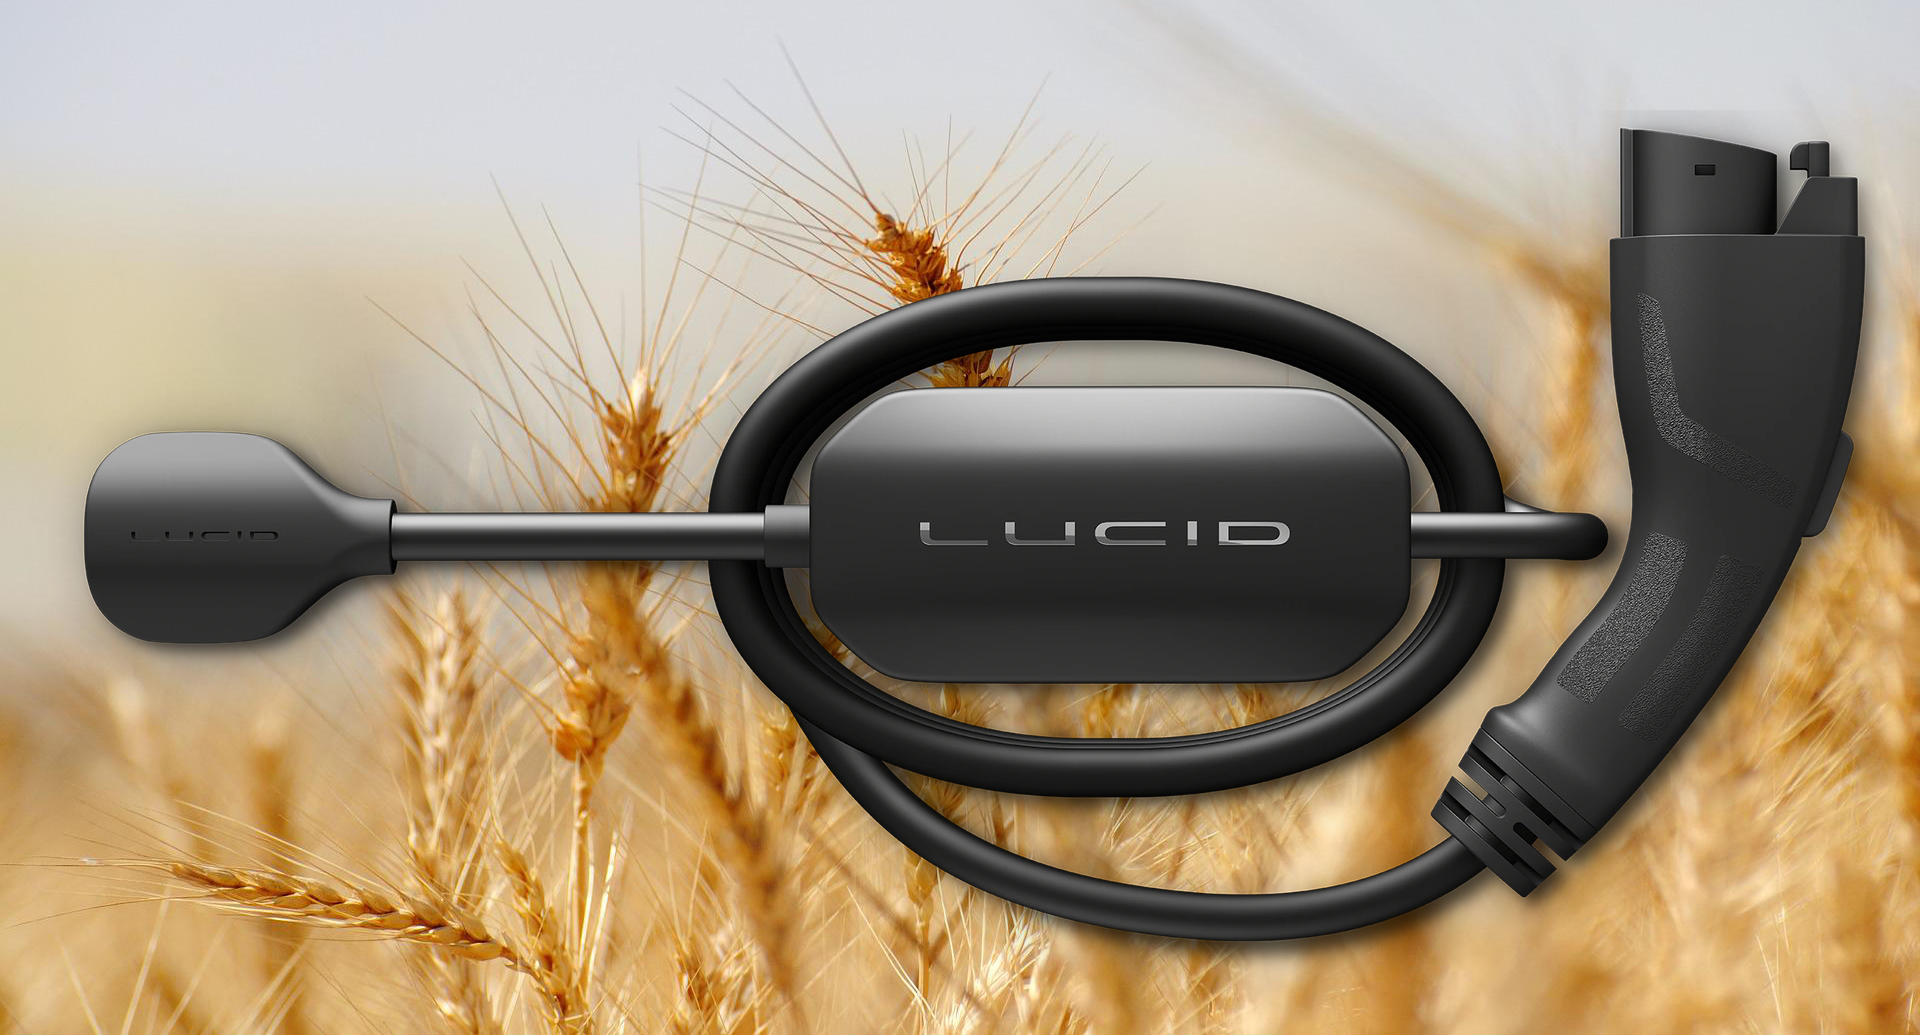 Lucid Connected Home Charging Station